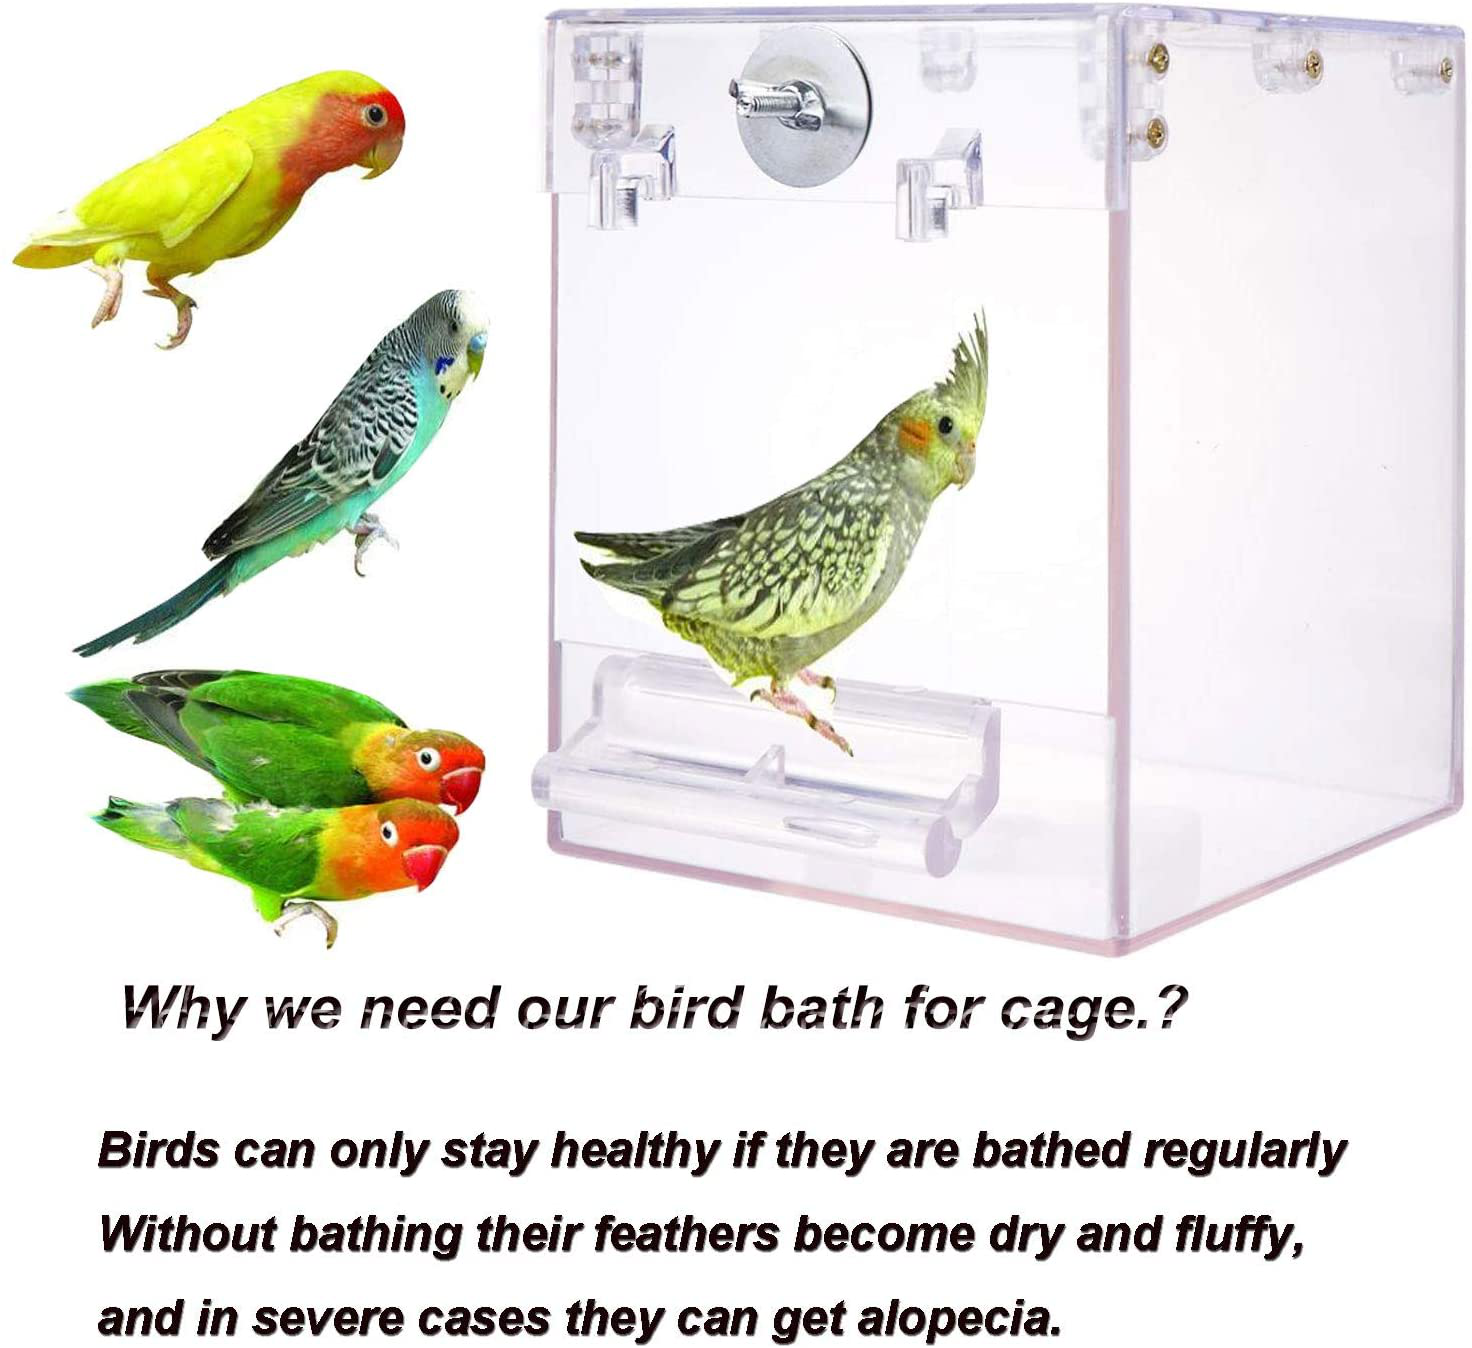 Chenming Bird Bath for Cage,Parrot Birdbath Shower Accessories,No-Leakage Design Hanging Bathtub Tube Shower Box Bowl Cage Accessory for Pet Birds Canary Lovebirds Budgies